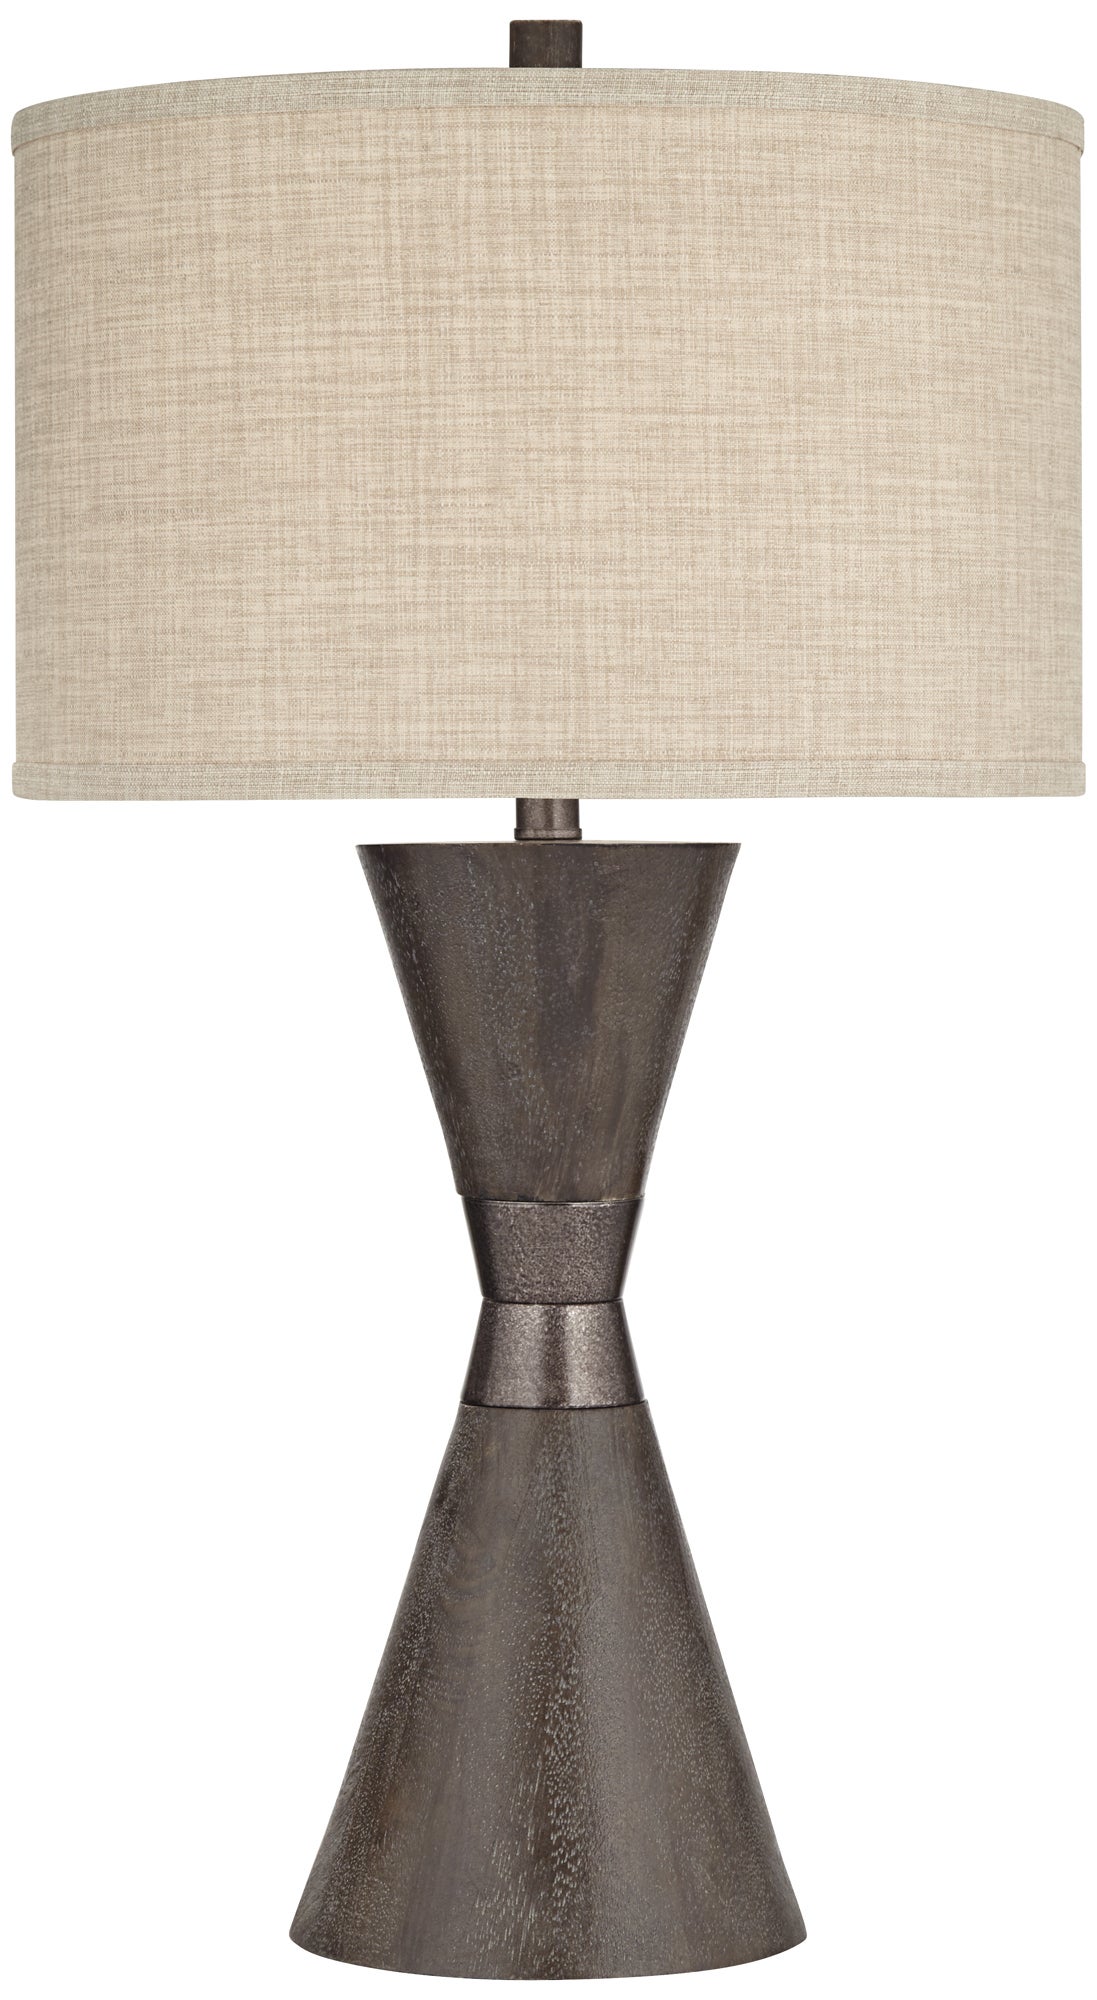 KINGSTOWN (87-08266-21) - table lamps | Pacific Coast Lighting